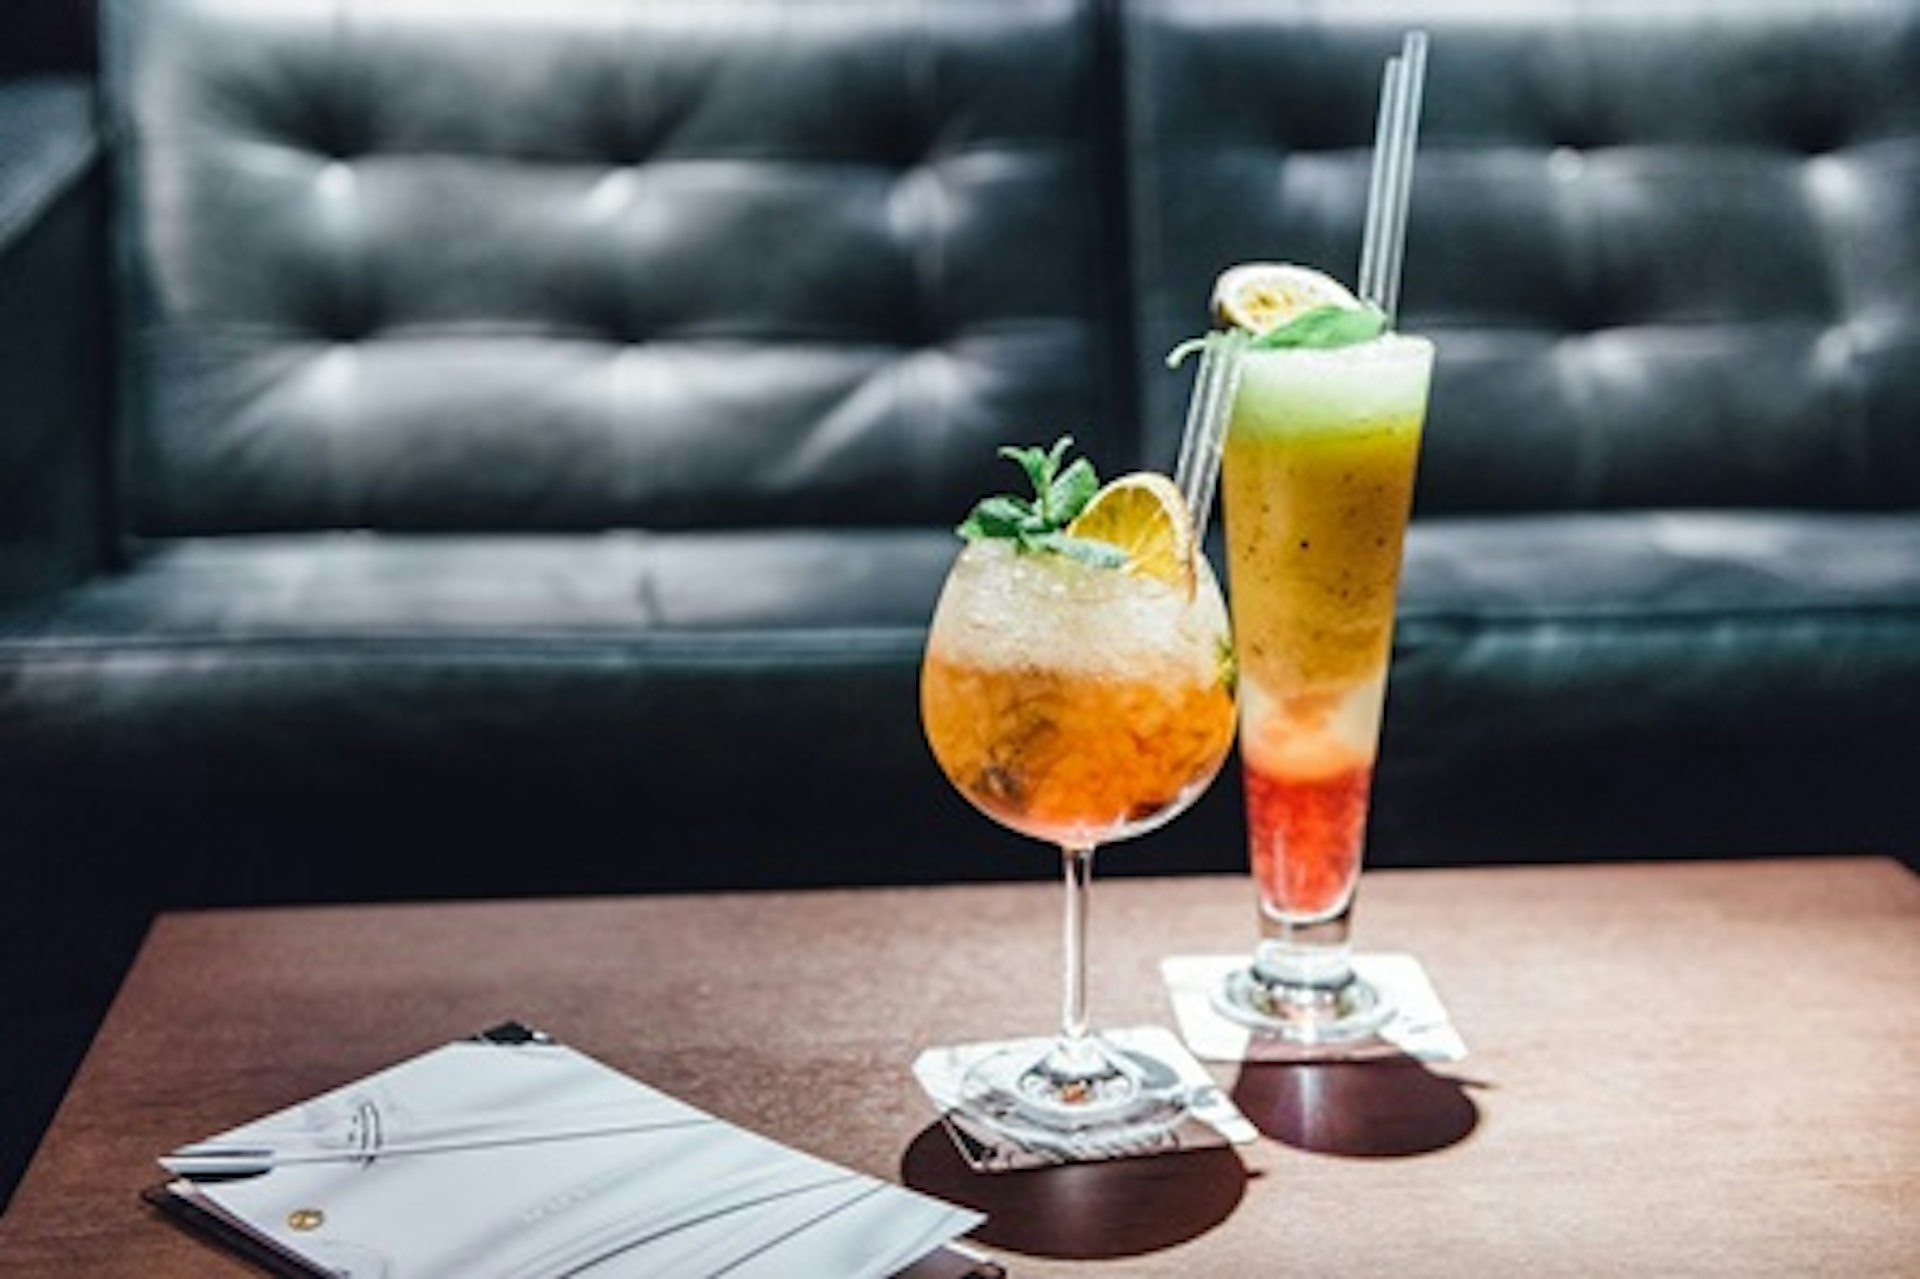 Three Course Dinner with Fizz, Cocktail and Live Music for Two at 100 Wardour Street, Soho 2